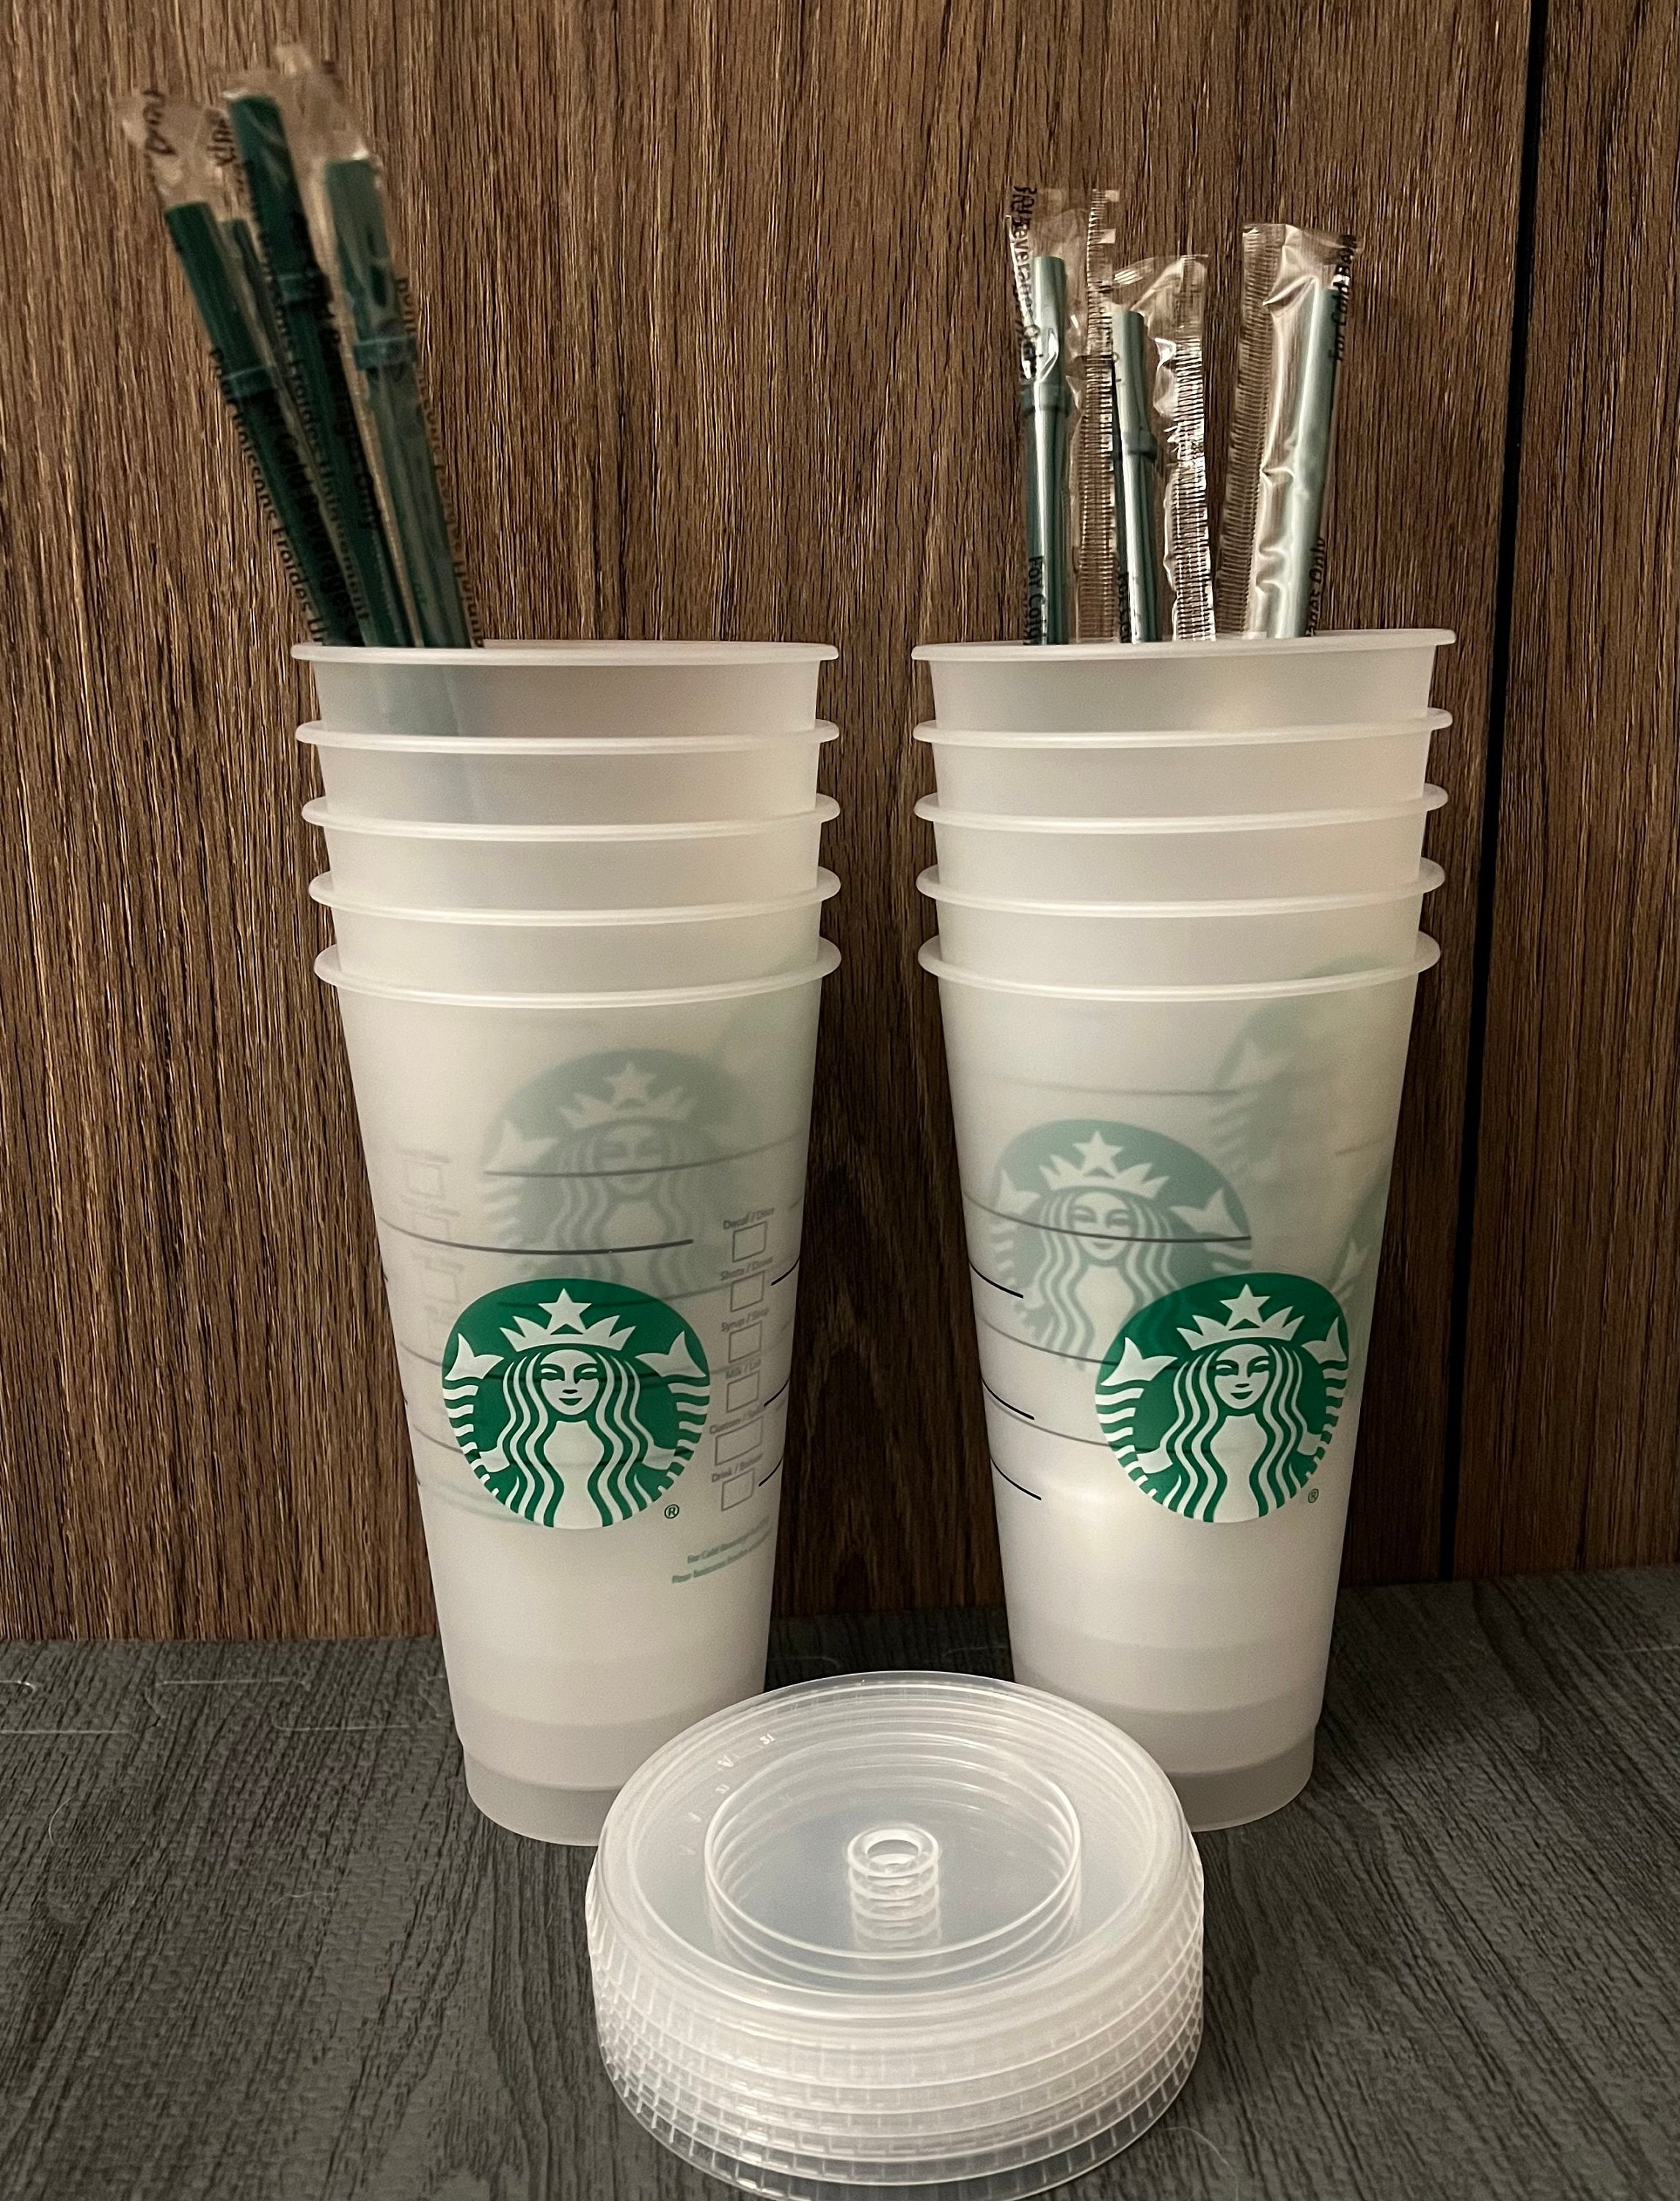 Reusable Plastic Cups With Lids 24oz Venti Size Craft Clear Cup 4